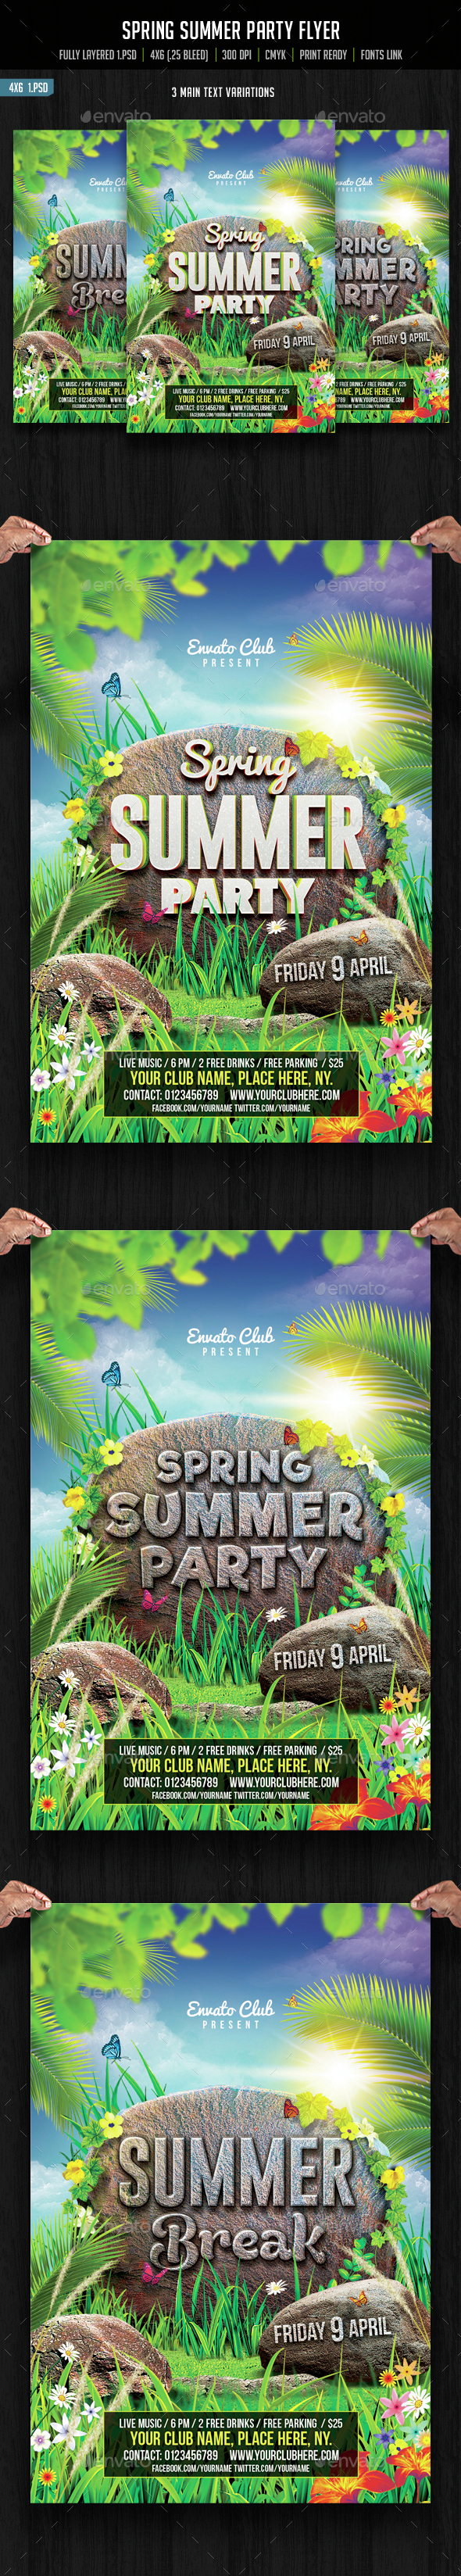 Spring Summer Party Flyer